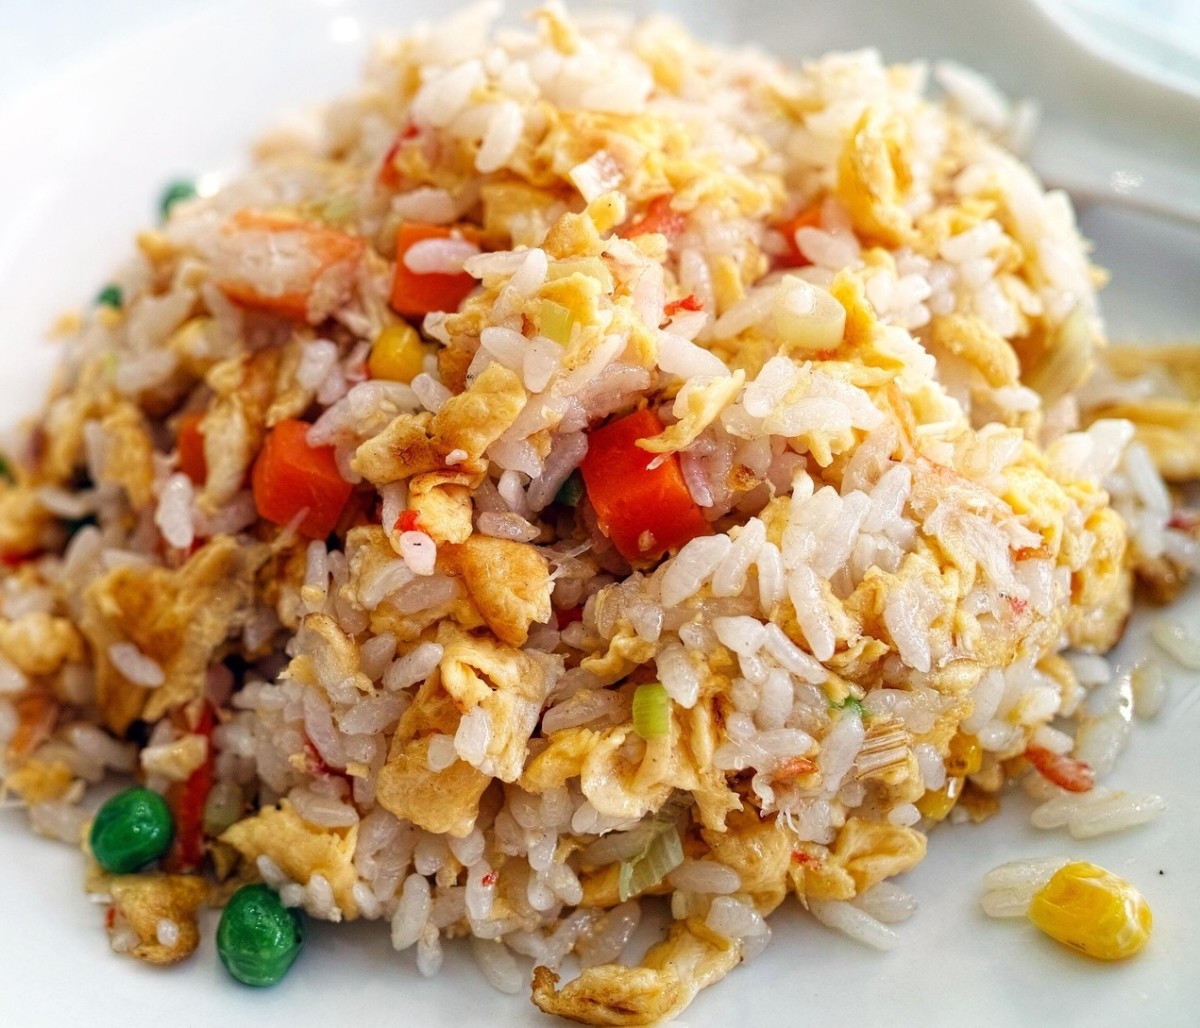 How to Make Perfect Chinese Fried Rice Every Time